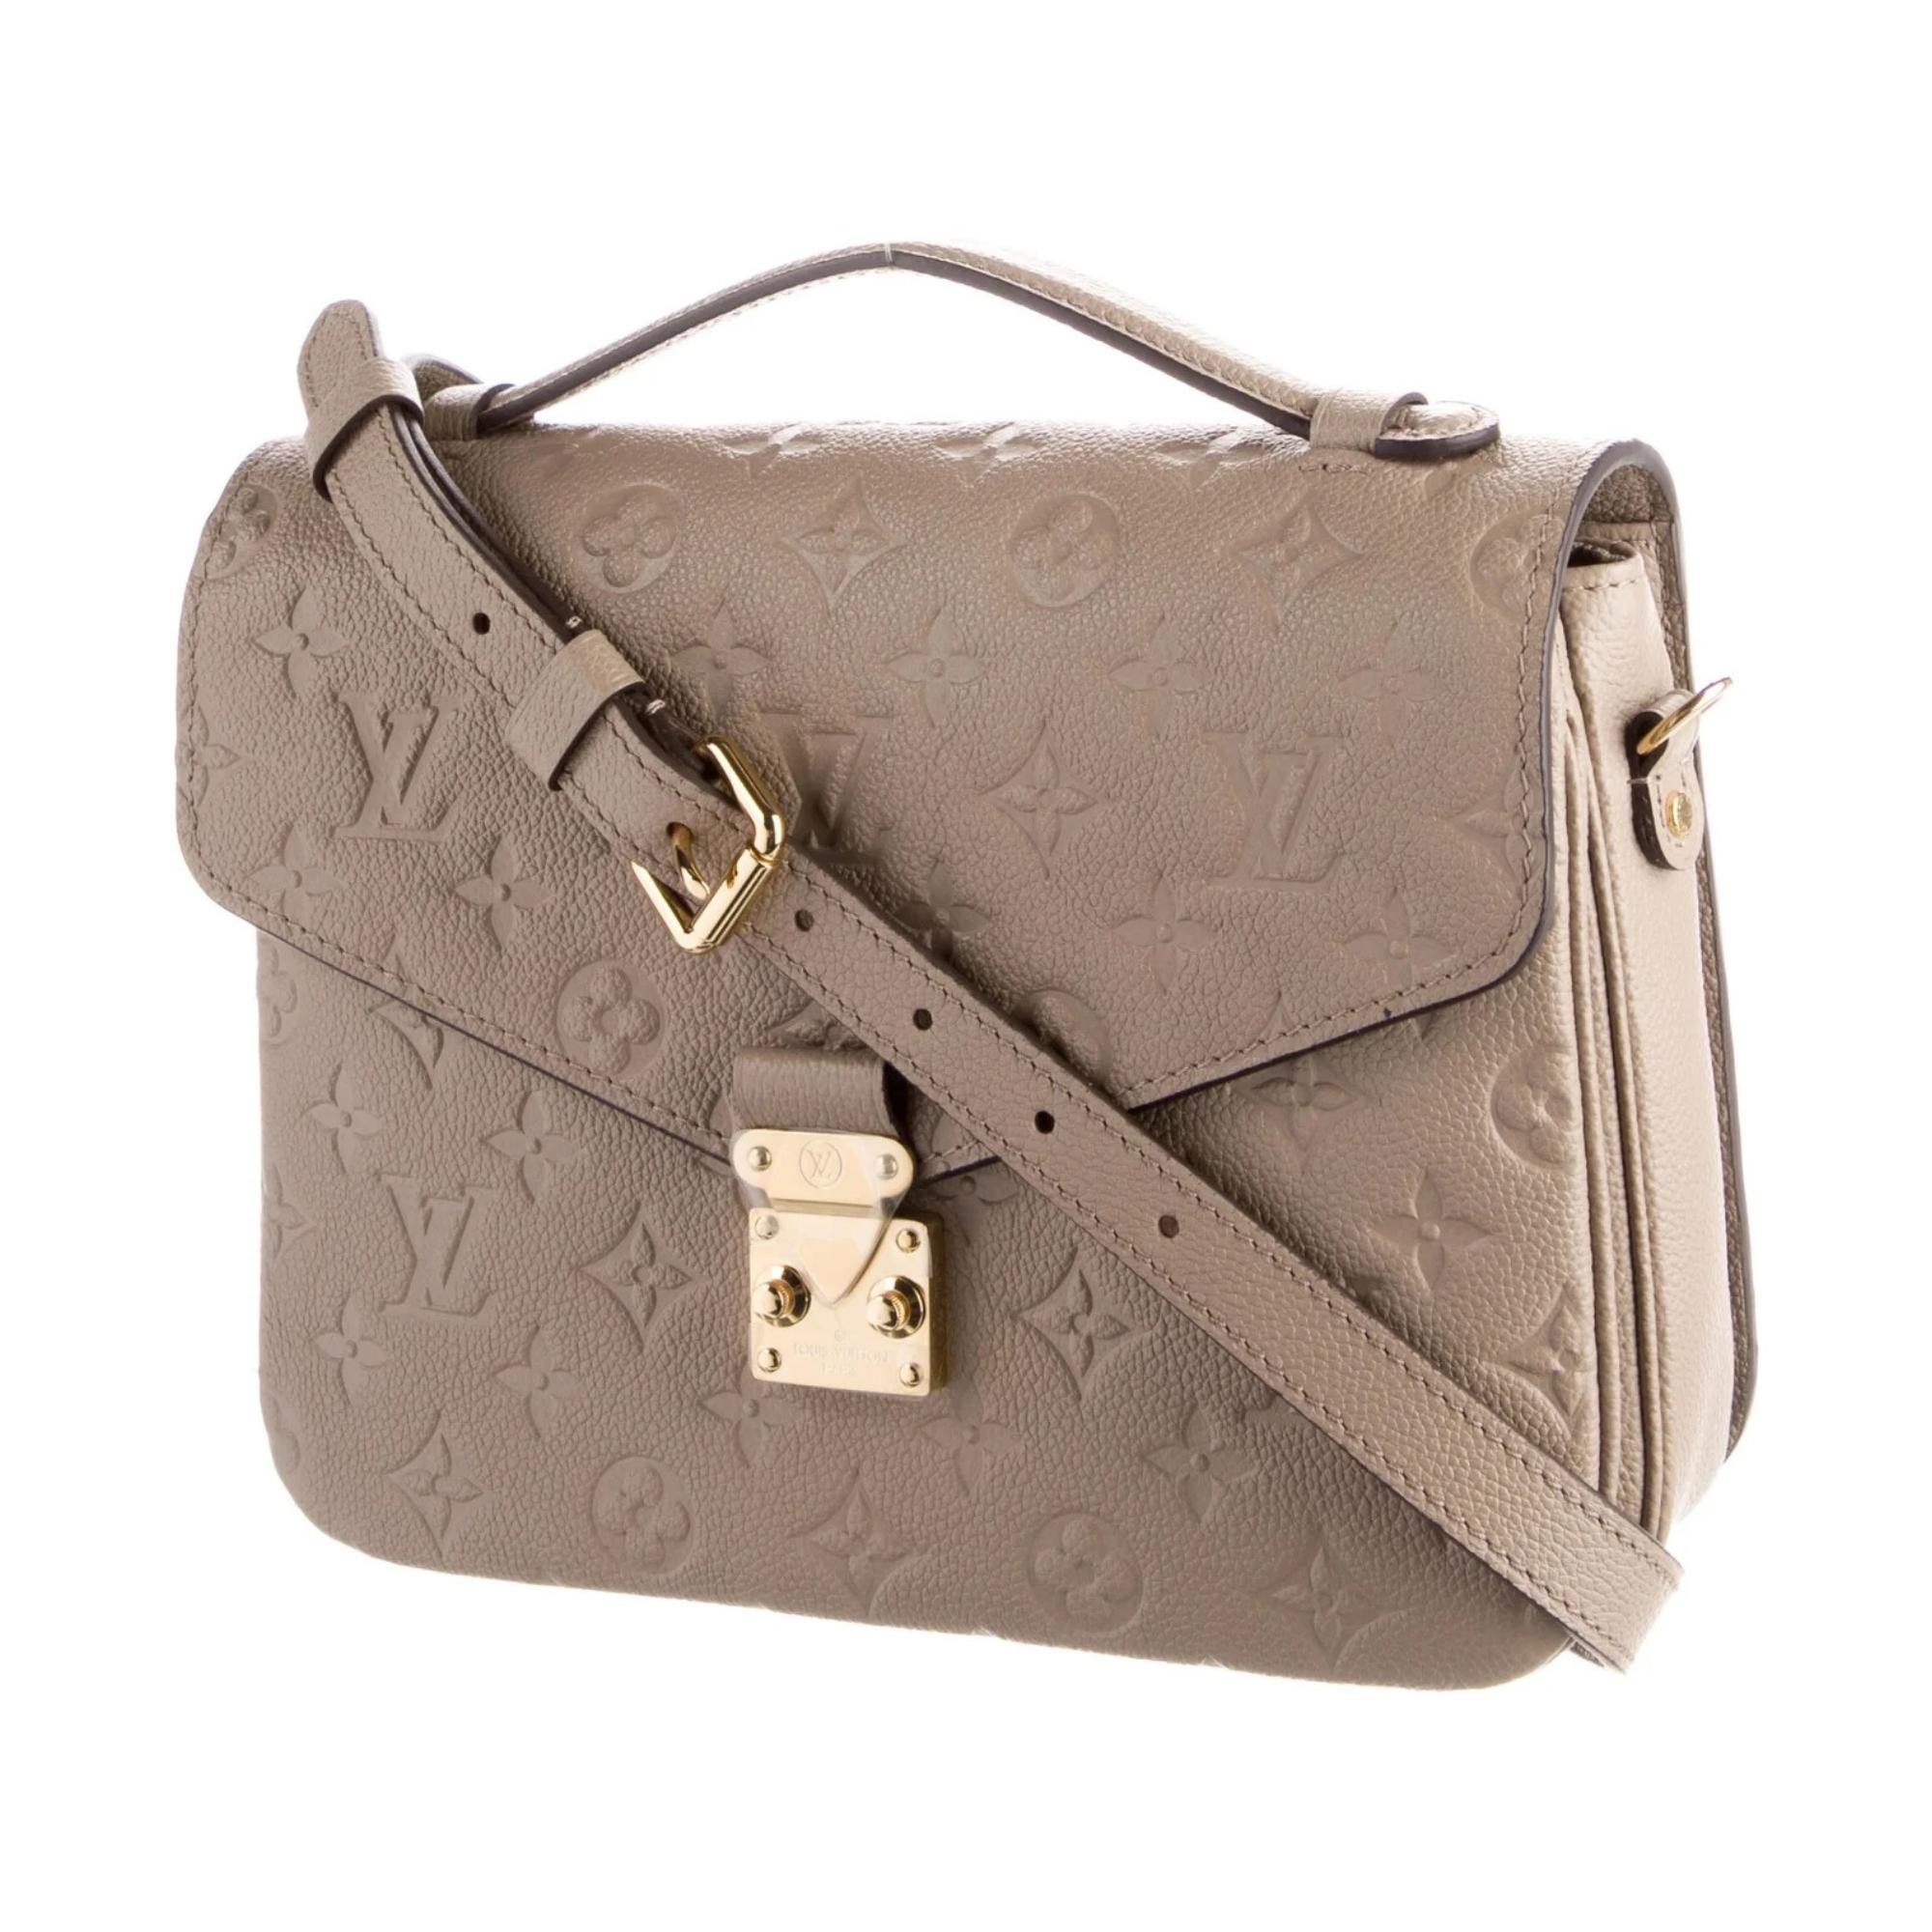 This shoulder bag is constructed of Louis Vuitton monogram-embossed leather in tourterelle grey (light taupe). Louis's empreinte leather is a supple grained cowhide with monogram embossing. The bag features a leather top handle, an optional